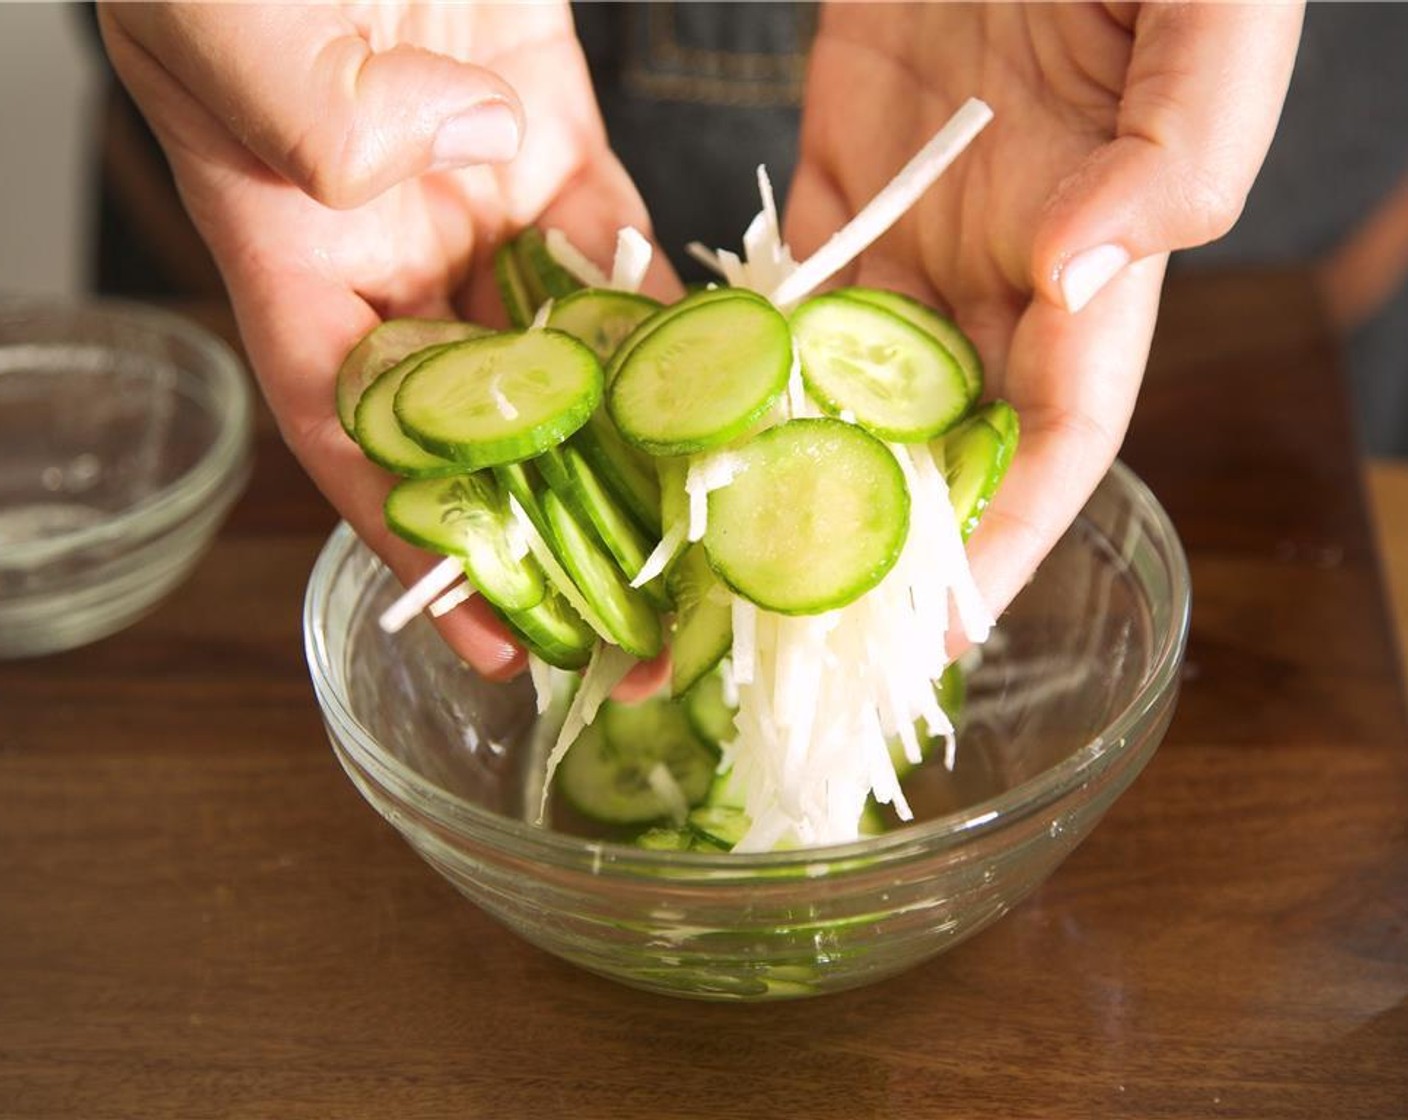 step 3 To make the dressing, pour Rice Vinegar (2 Tbsp) into second small bowl. Add the Granulated Sugar (3 Tbsp) and stir until dissolved. Drizzle the dressing over the jicama and cucumber and gently toss, hold until plating.